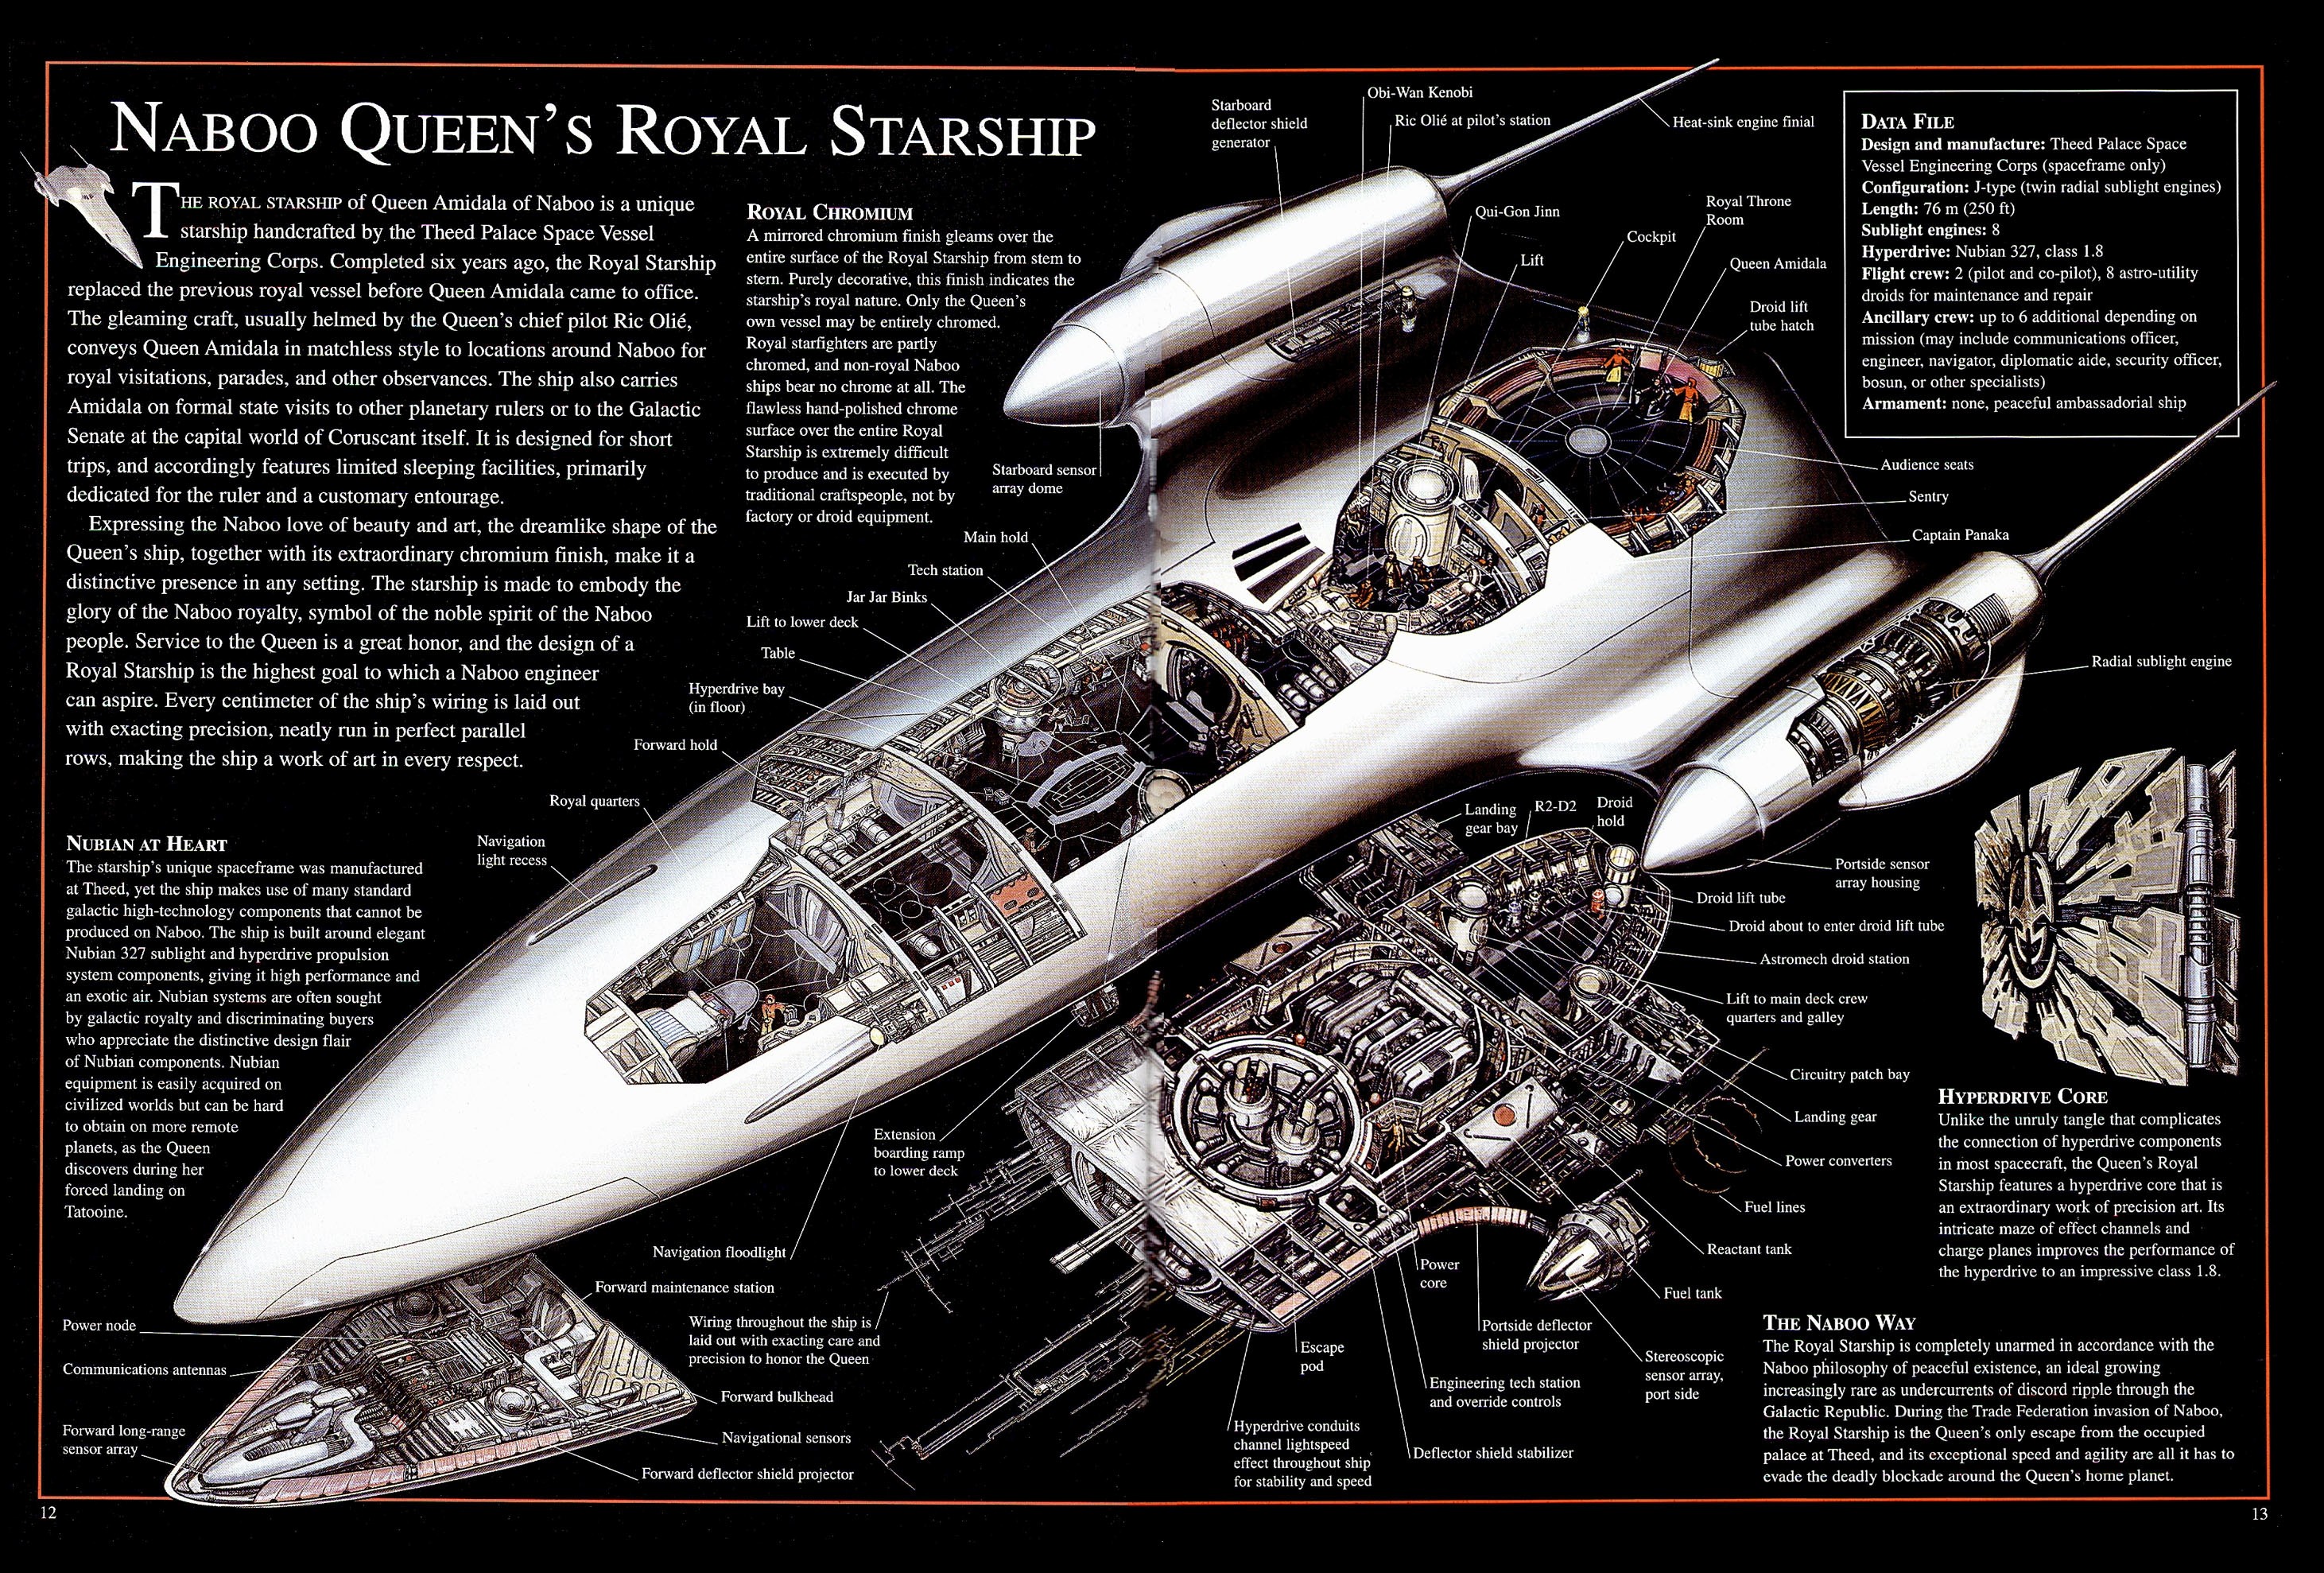 General 2923x1978 cross section Star Wars Star Wars: Episode I - The Phantom Menace blueprints movies science fiction infographics vehicle spaceship